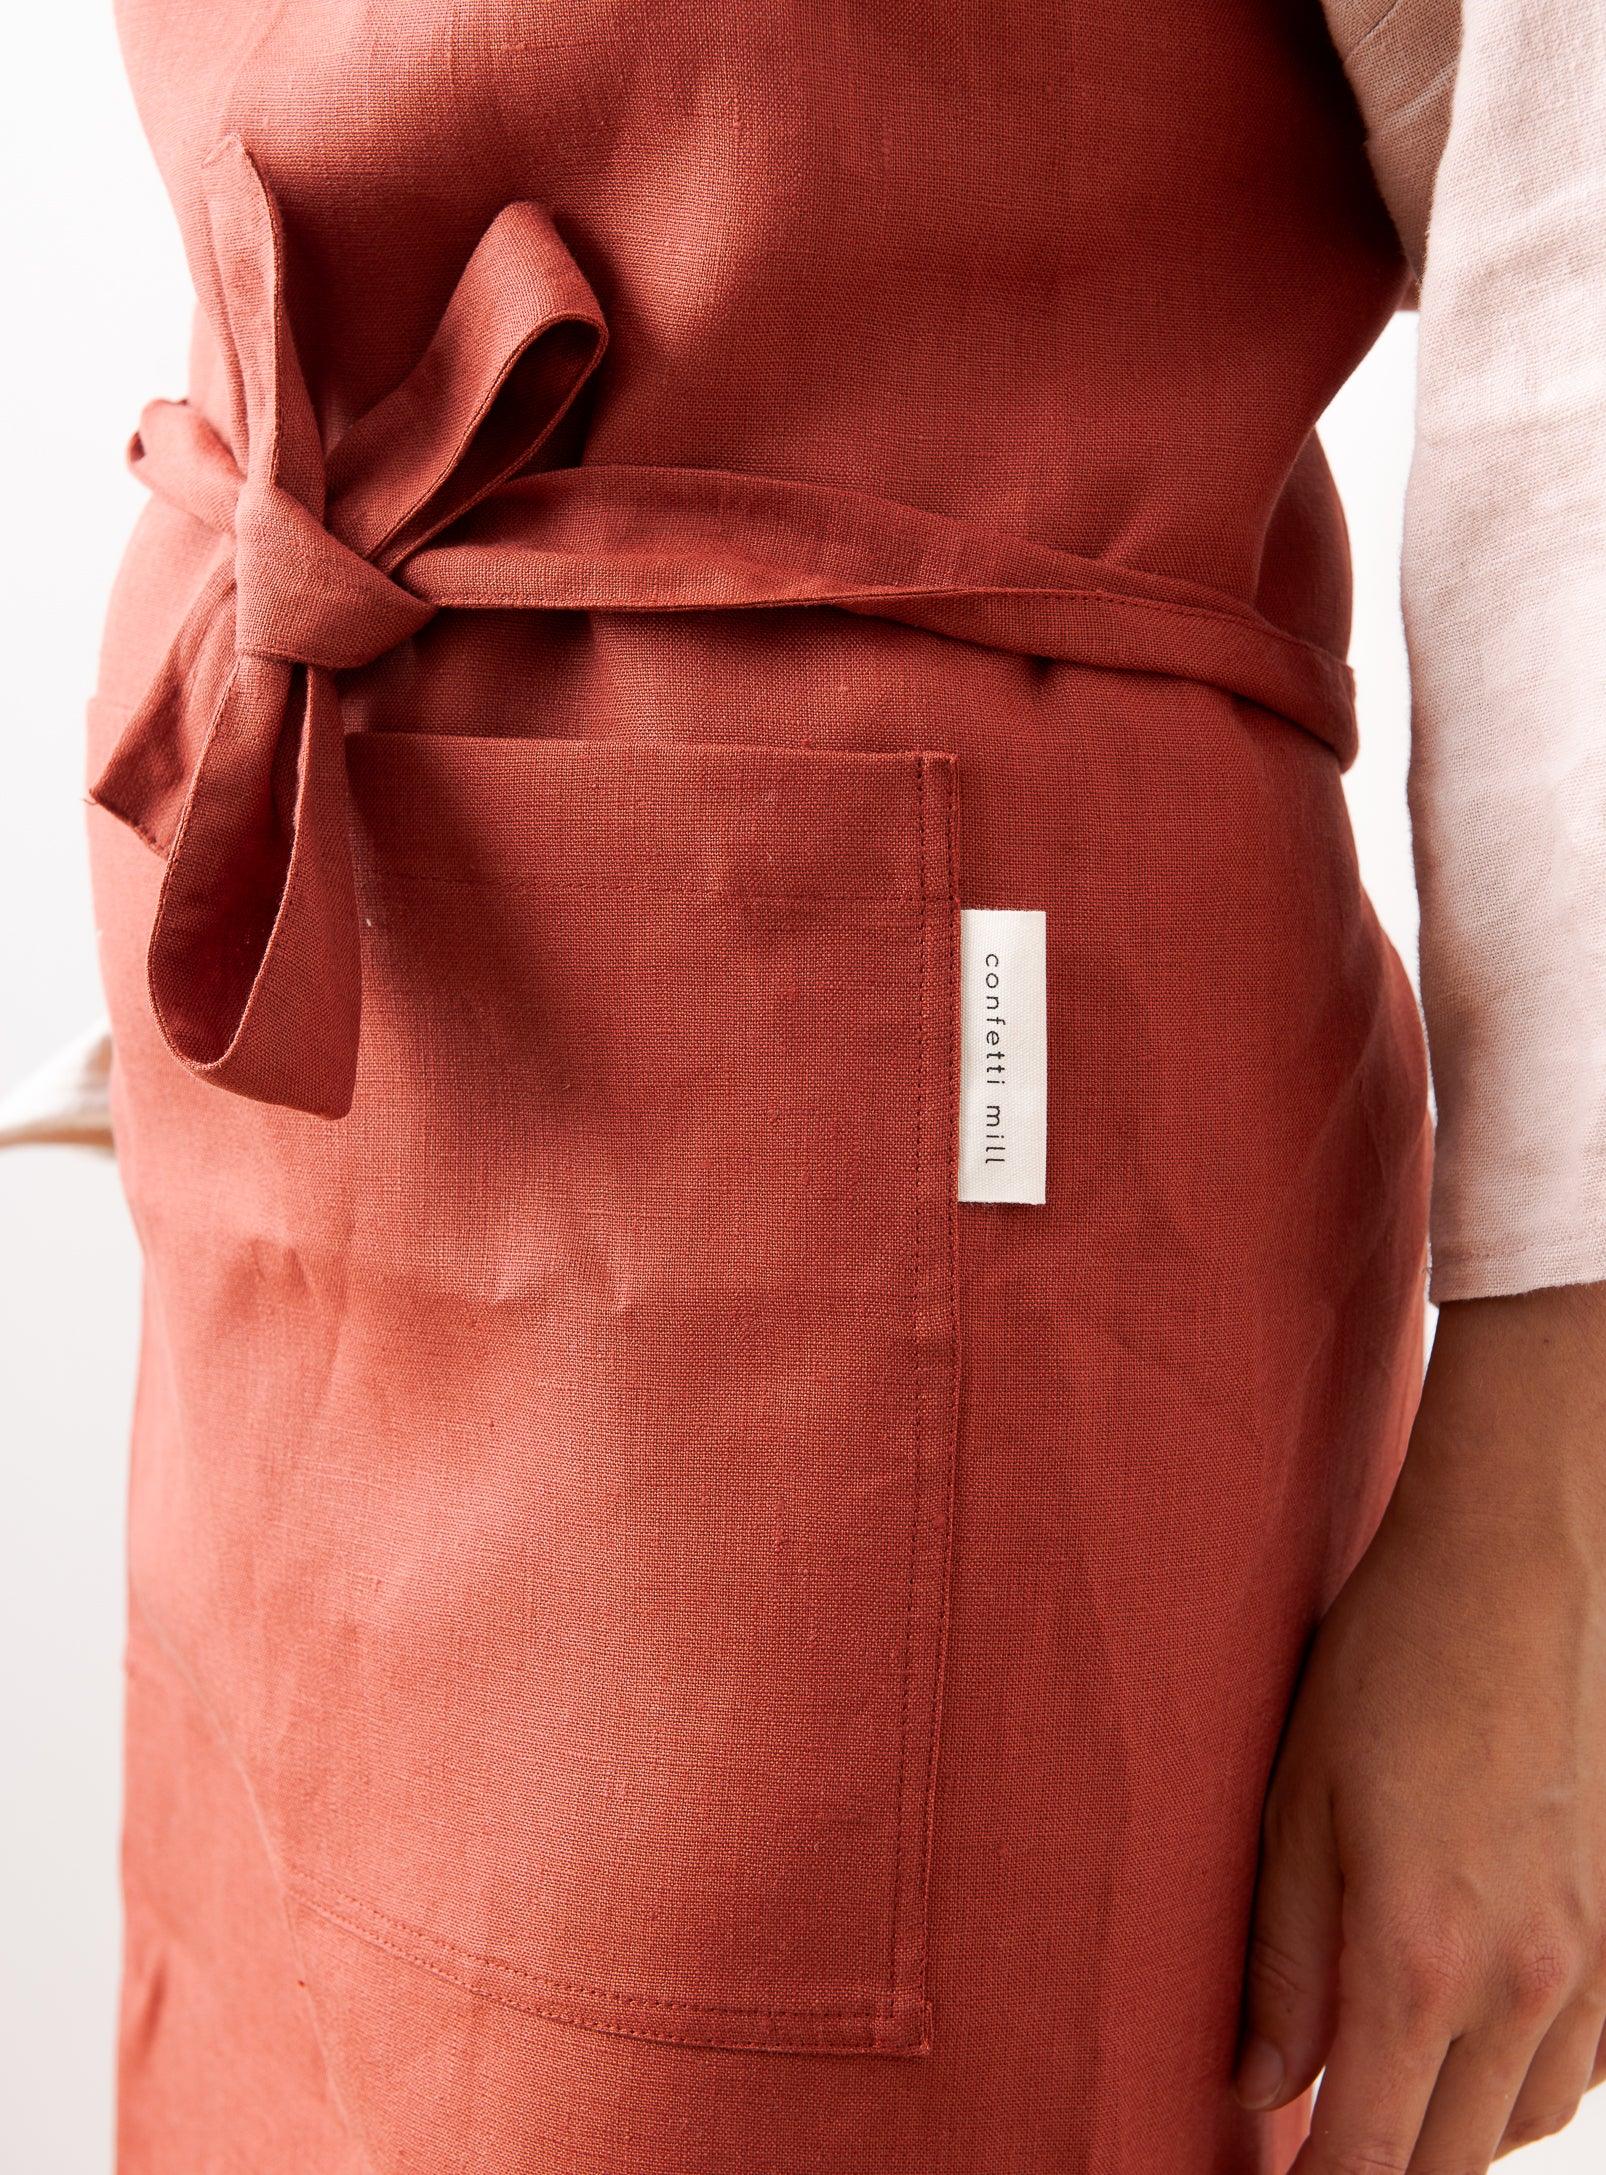 a detailed view of a red linen apron where we see the brand name tag confetti mill